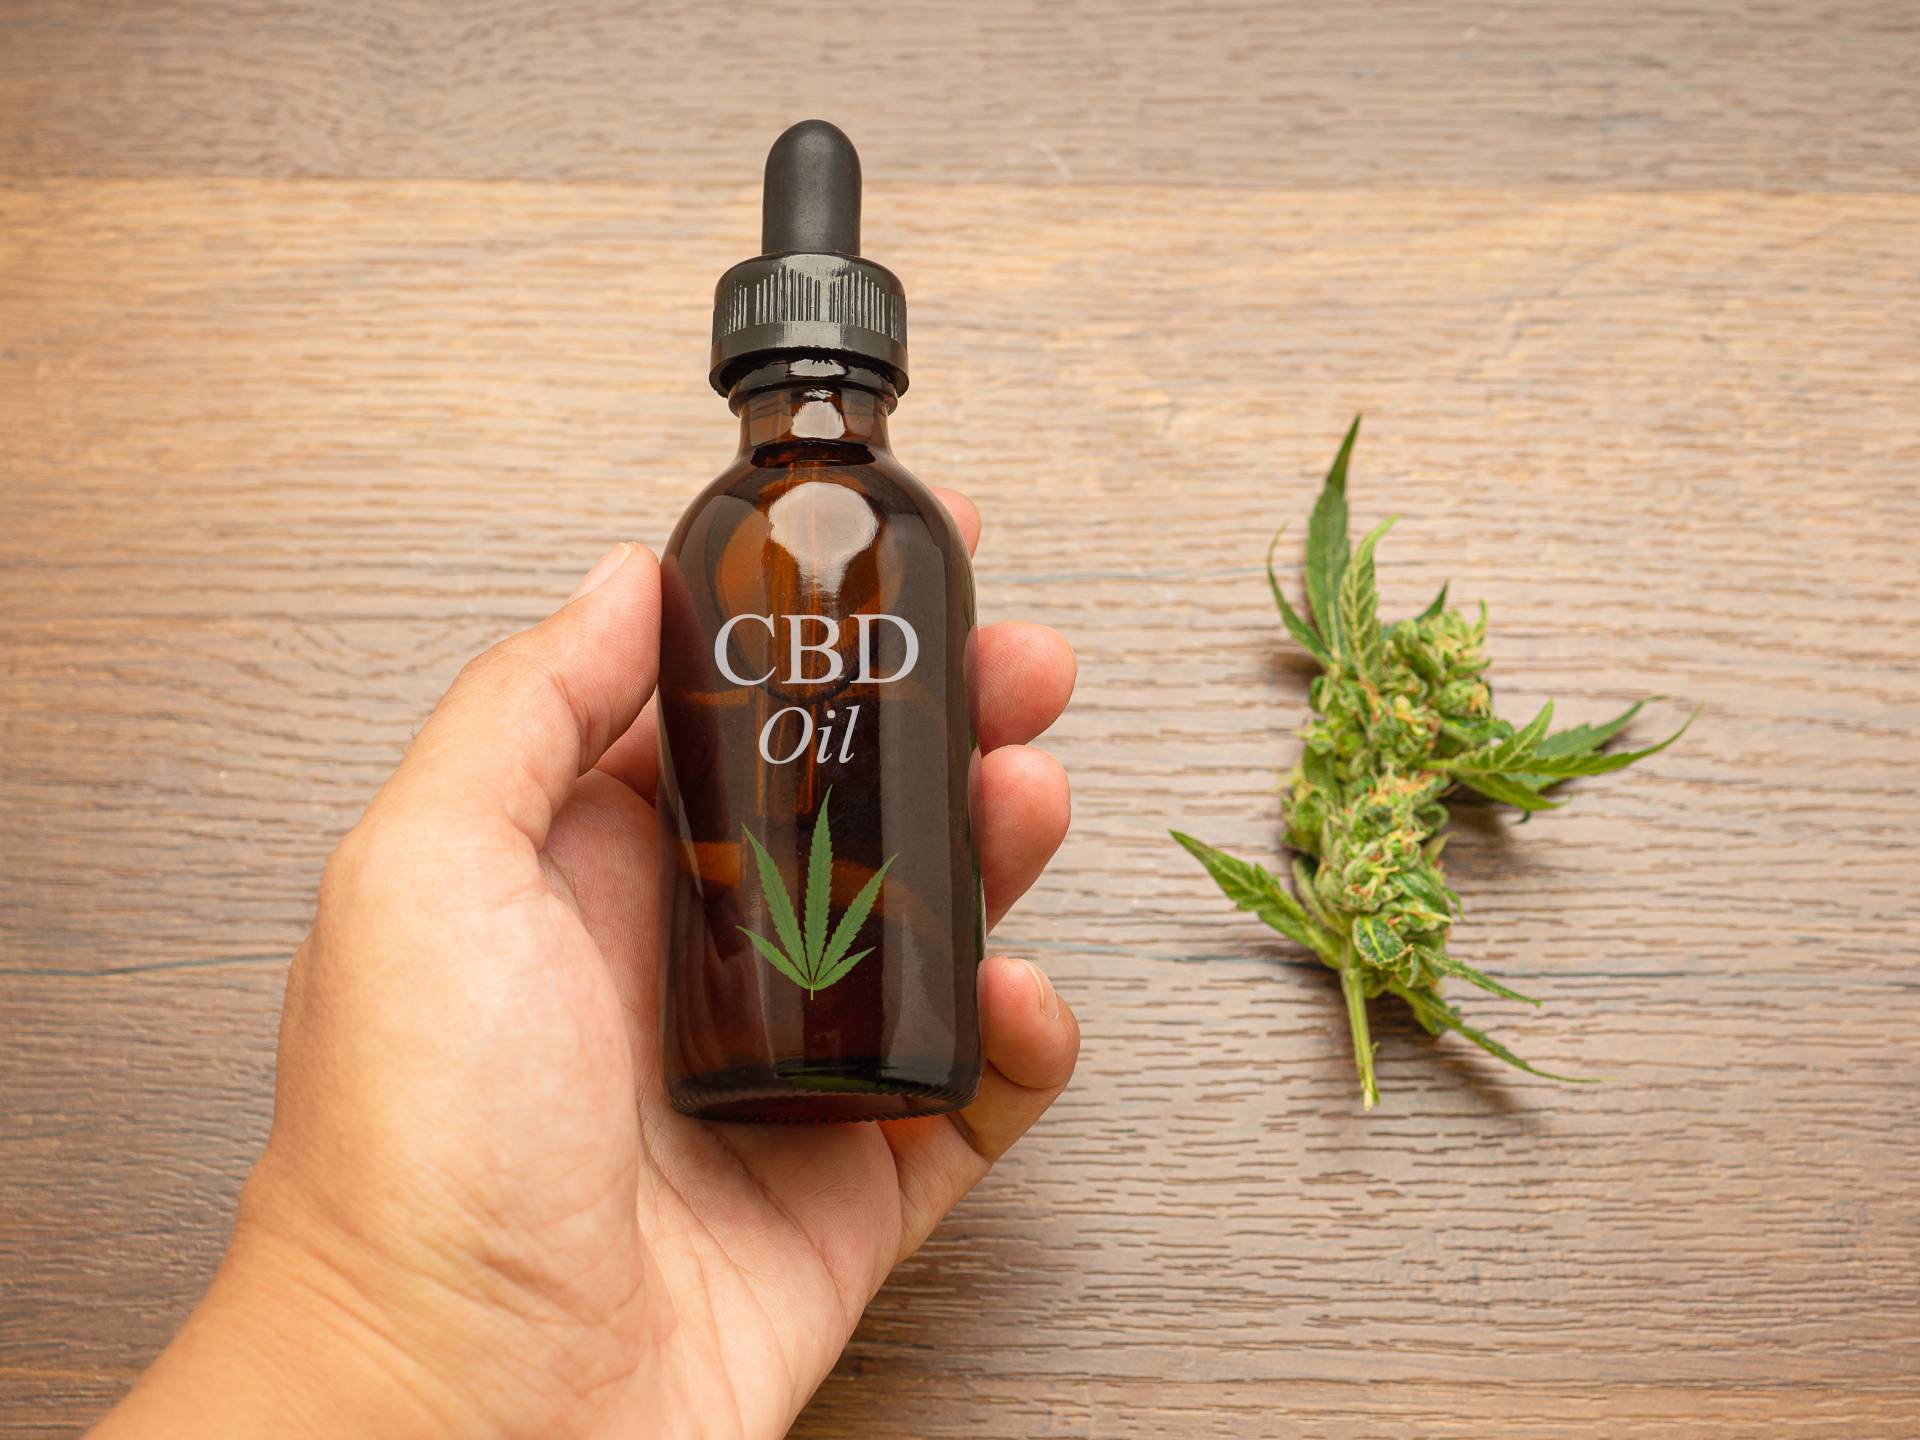 Myths and Facts About CBD